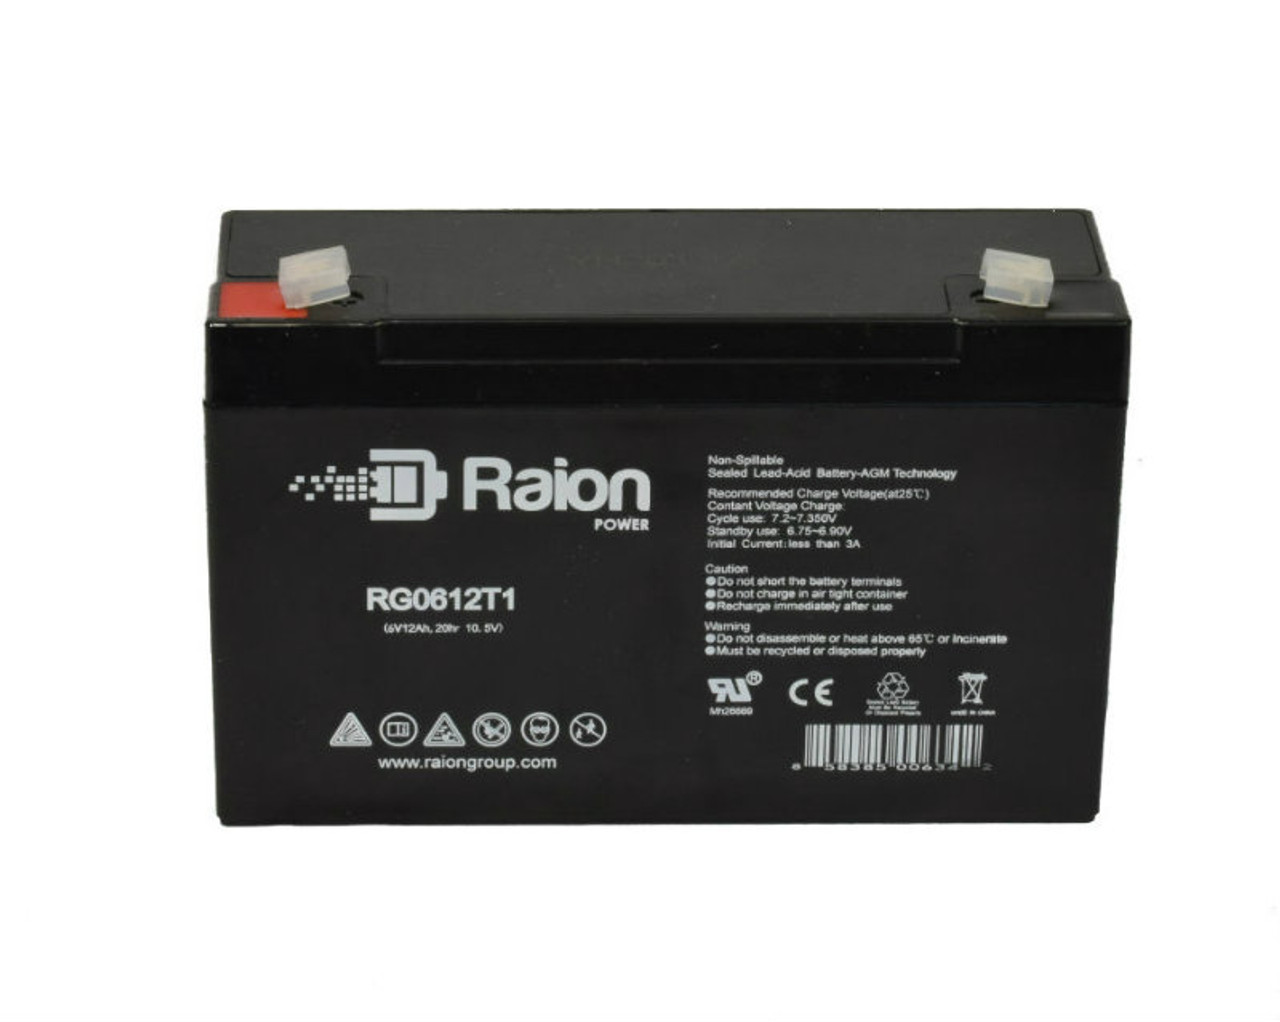 Raion Power RG06120T1 Replacement Battery Cartridge for Topaz 32200